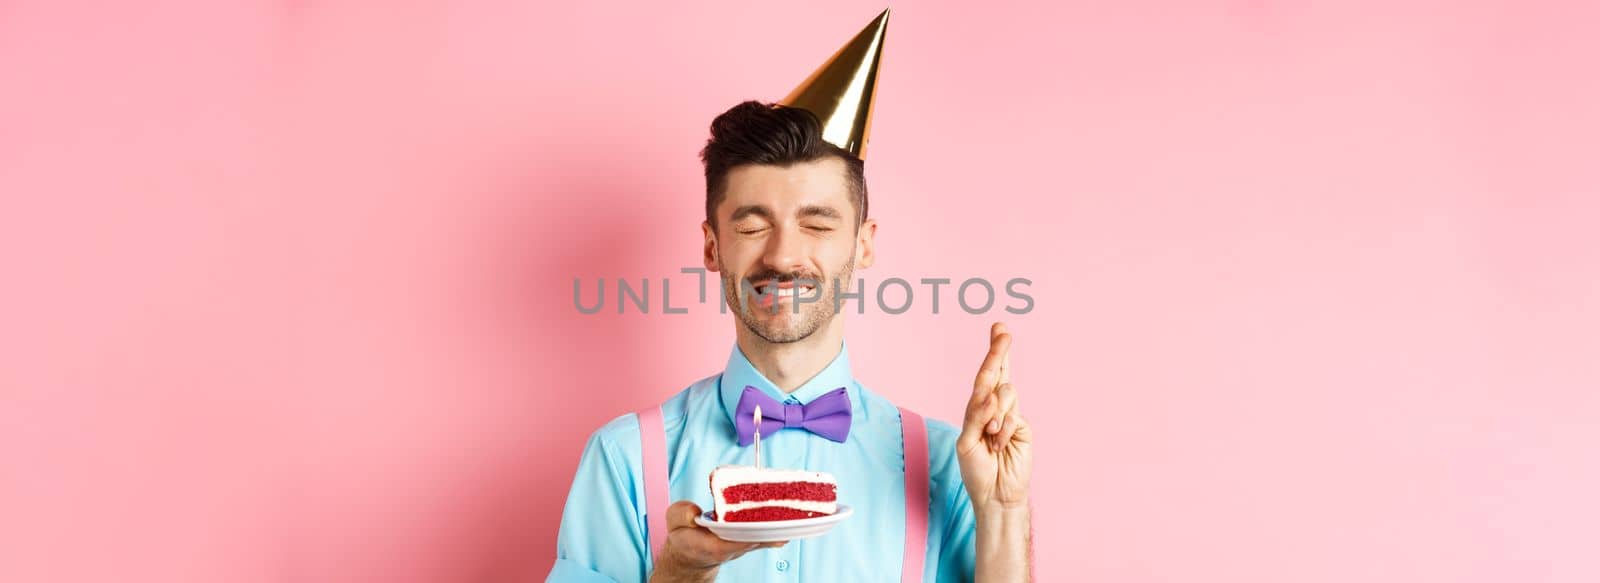 Holidays and celebration concept. Hopeful birthday guy in party hat making wish, holding cake with candle and cross fingers for dream come true, pink background by Benzoix